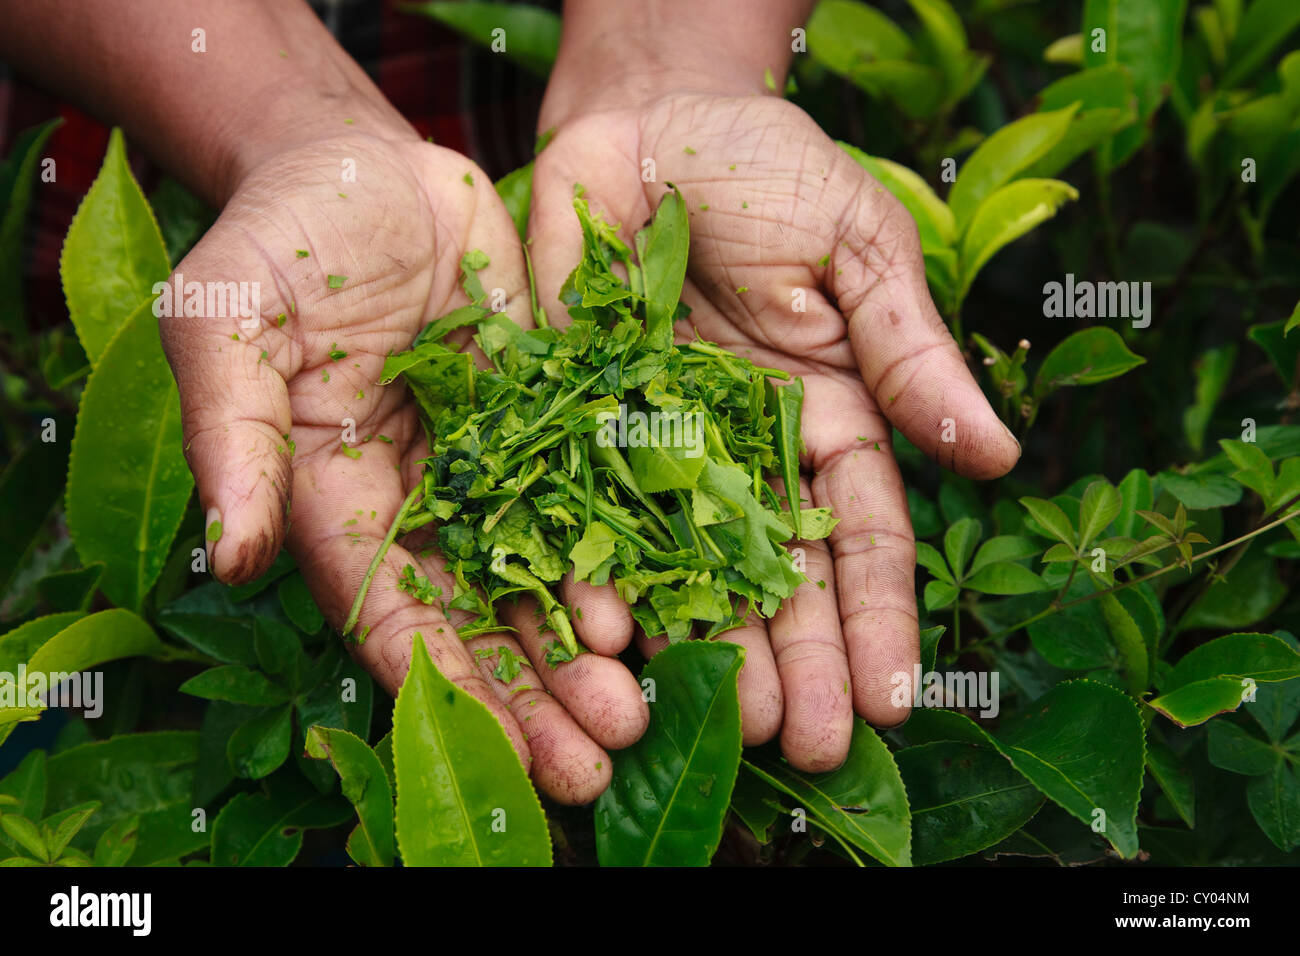 Woman's hands holding crushed tea leaves, freshly picked from bushes in a tea plantation, Sri Lanka Stock Photo